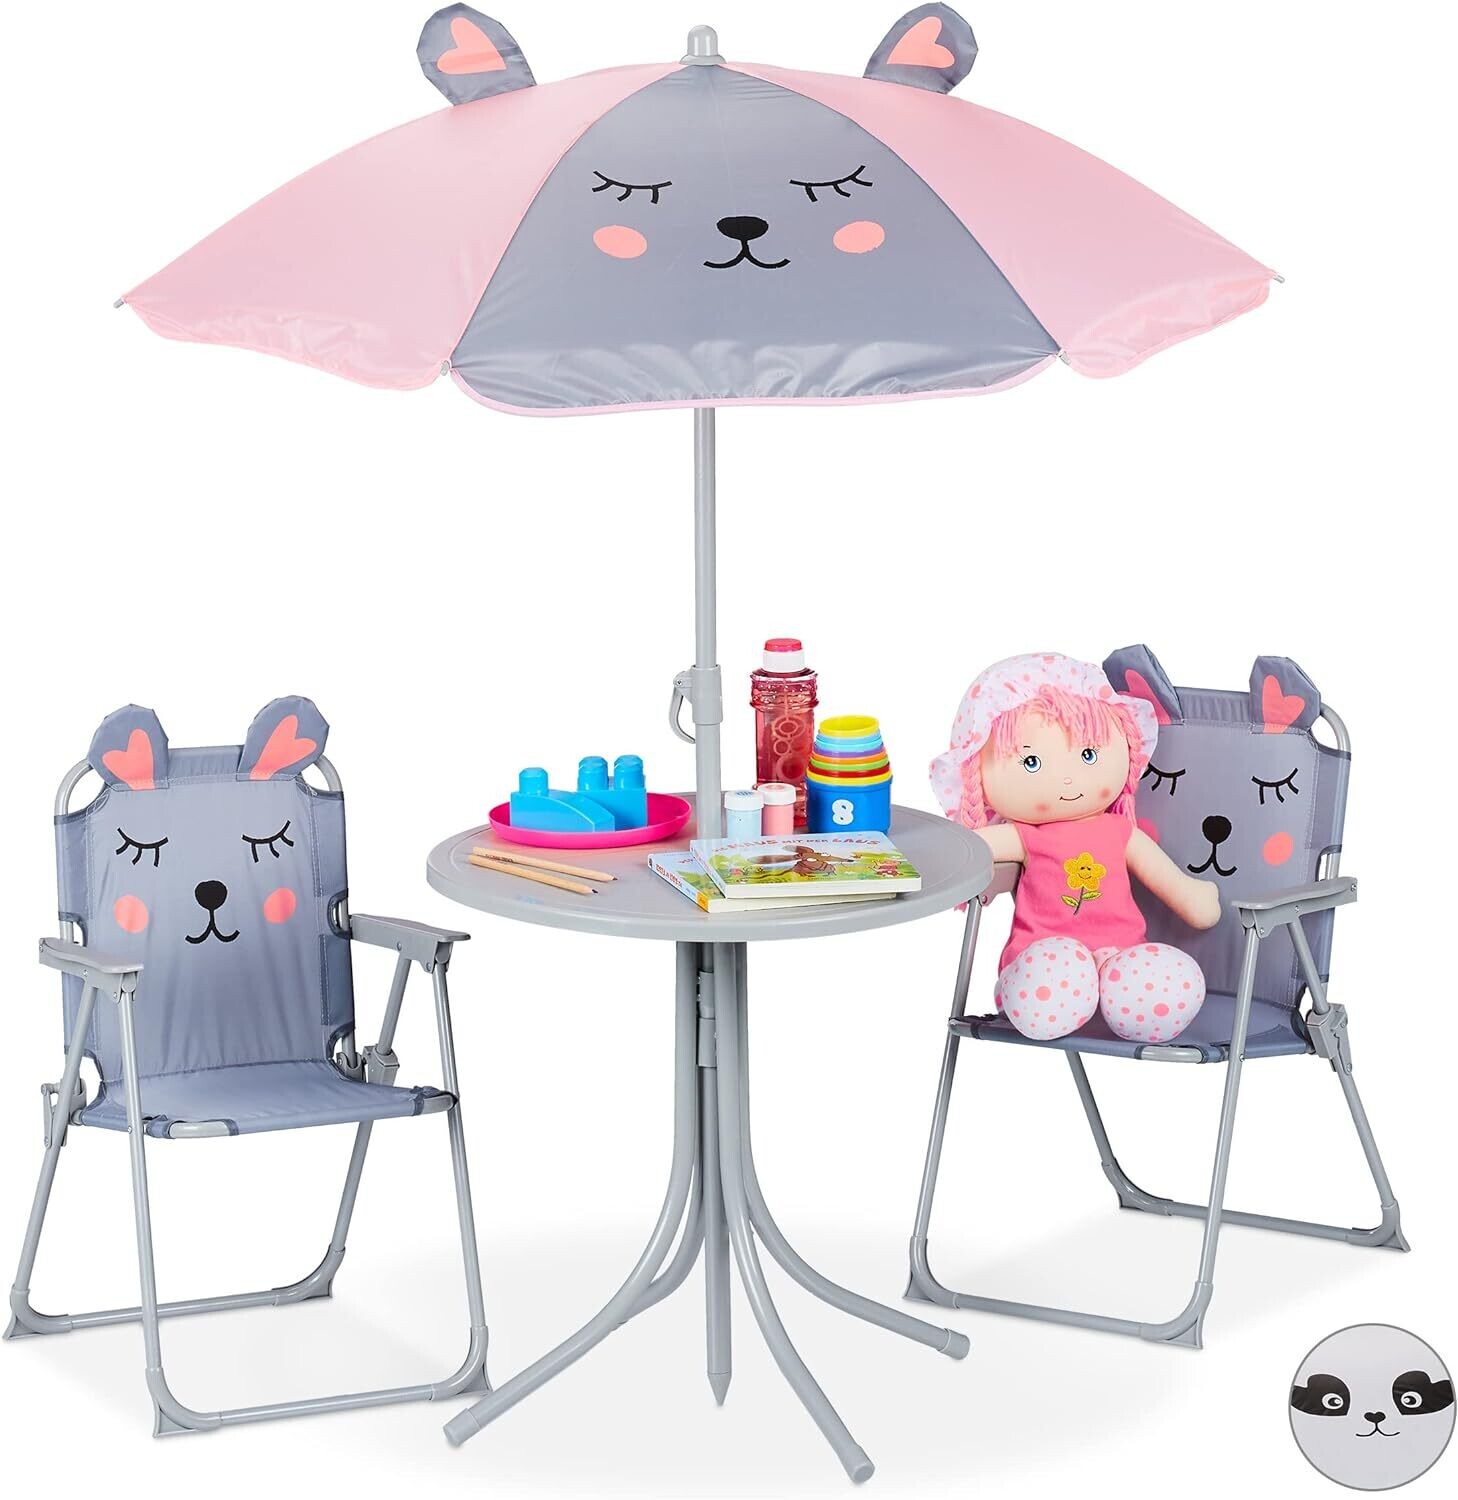 Children's Camping Seating Set with Umbrella, Children's Folding Chairs & Table, Camping & Garden